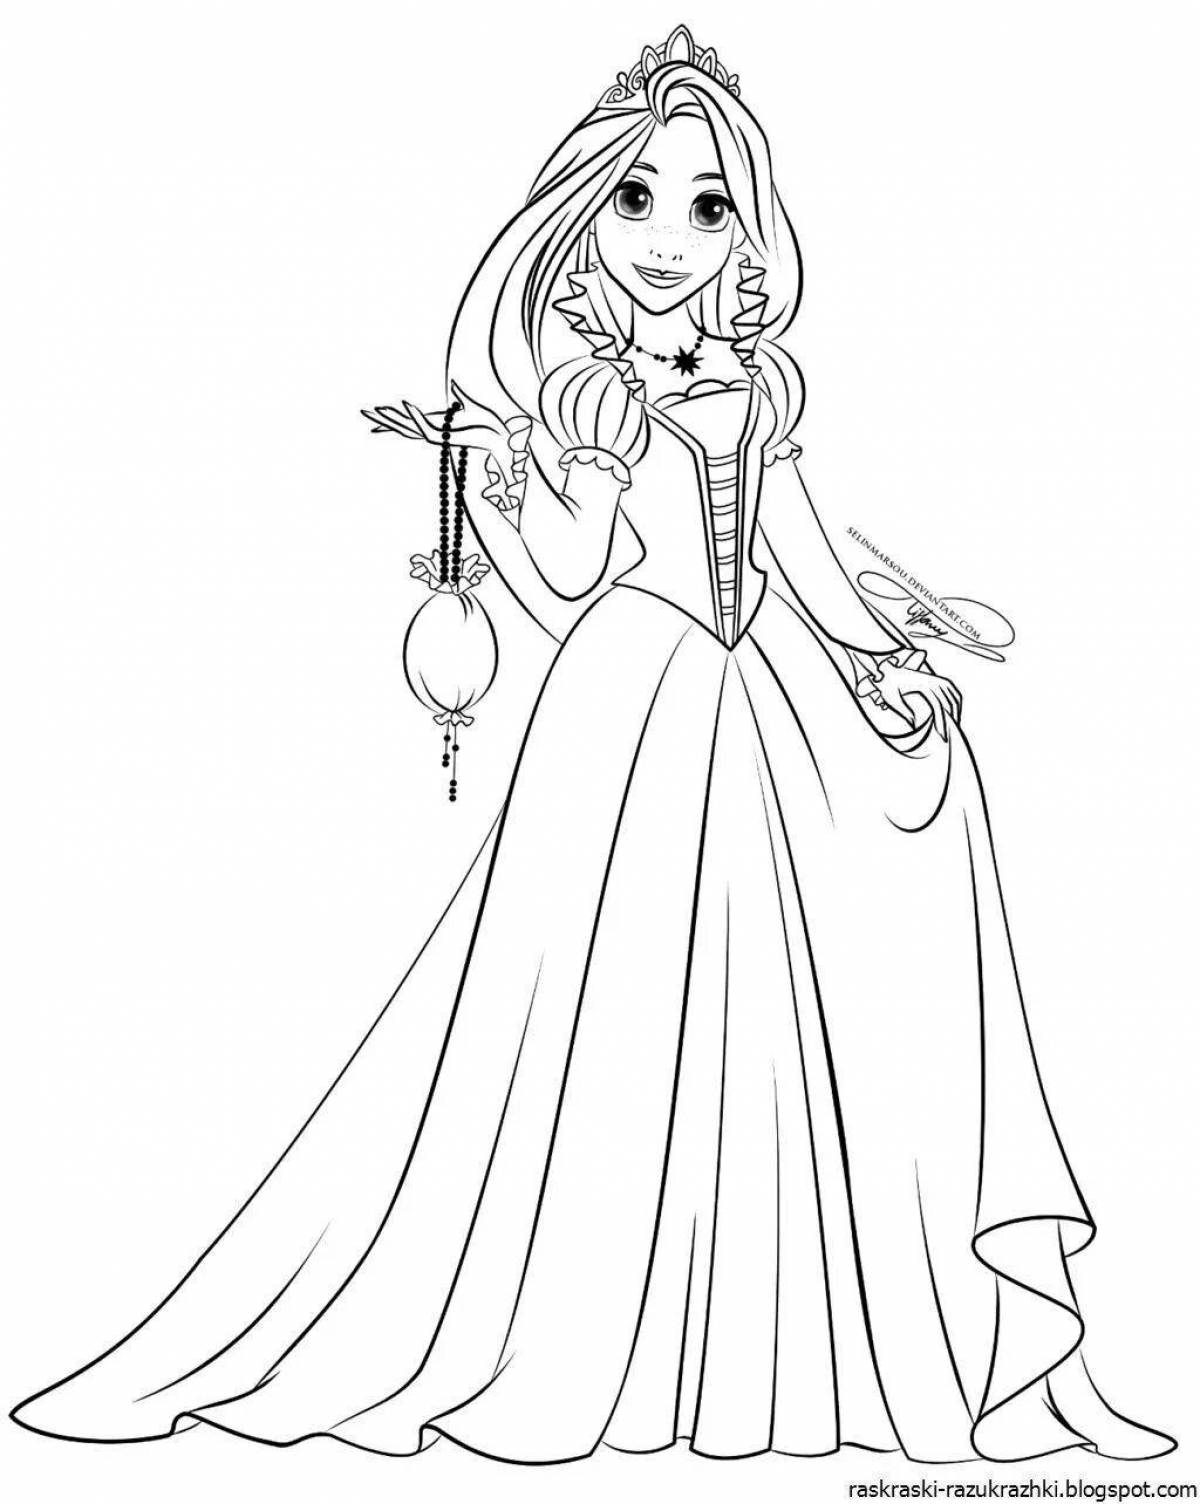 Animated rapunzel coloring book for kids